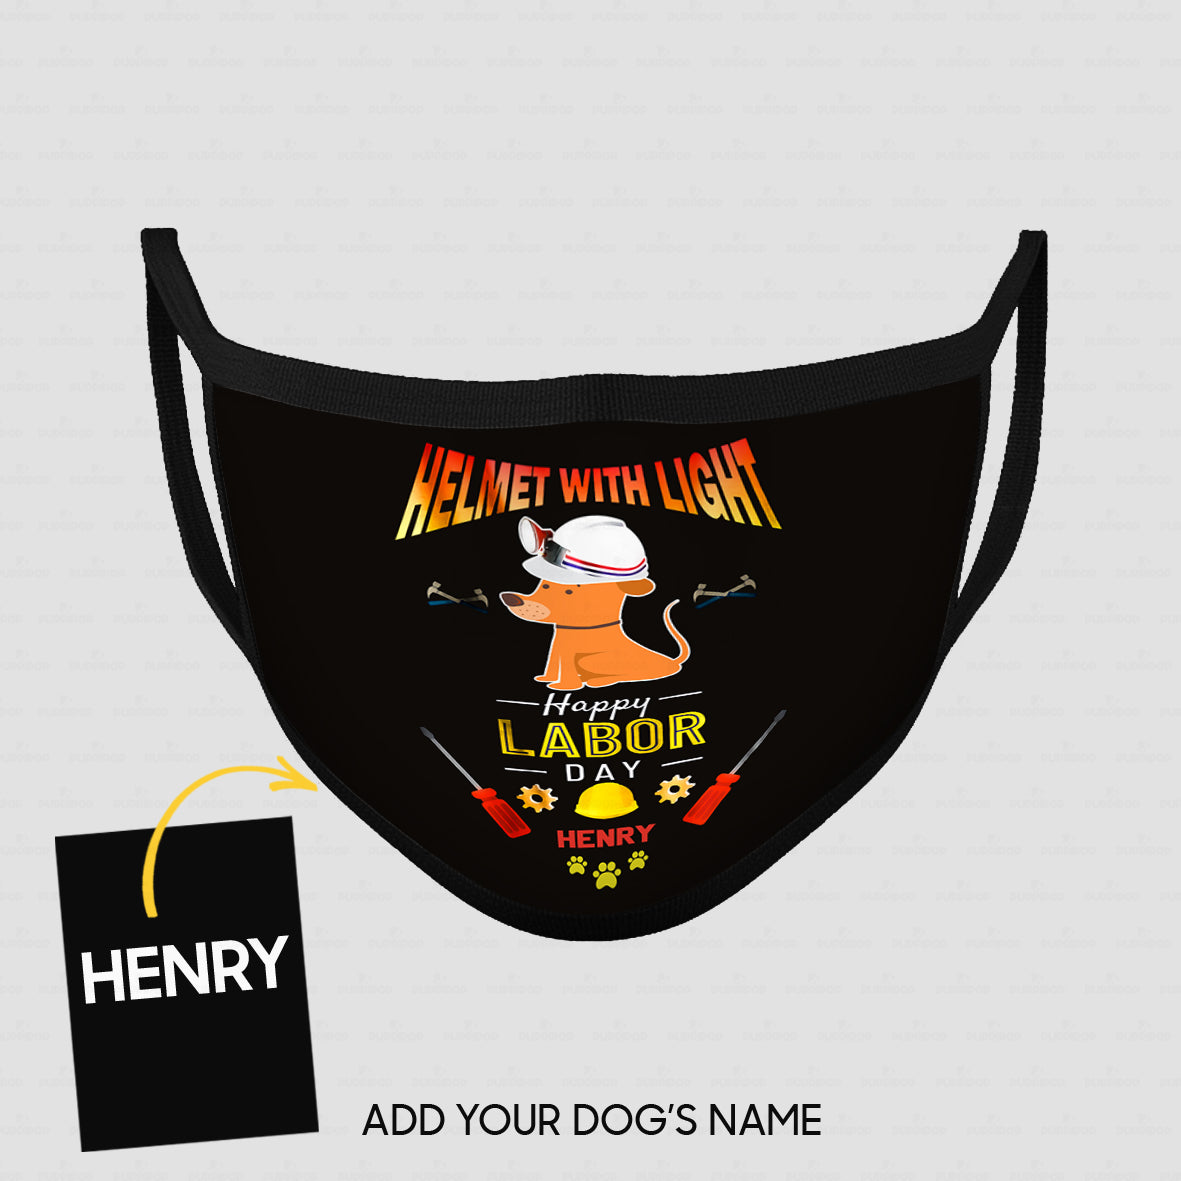 Personalized Dog Gift Idea - Helmet With Light Happy Labor Day For Dog Lovers - Cloth Mask